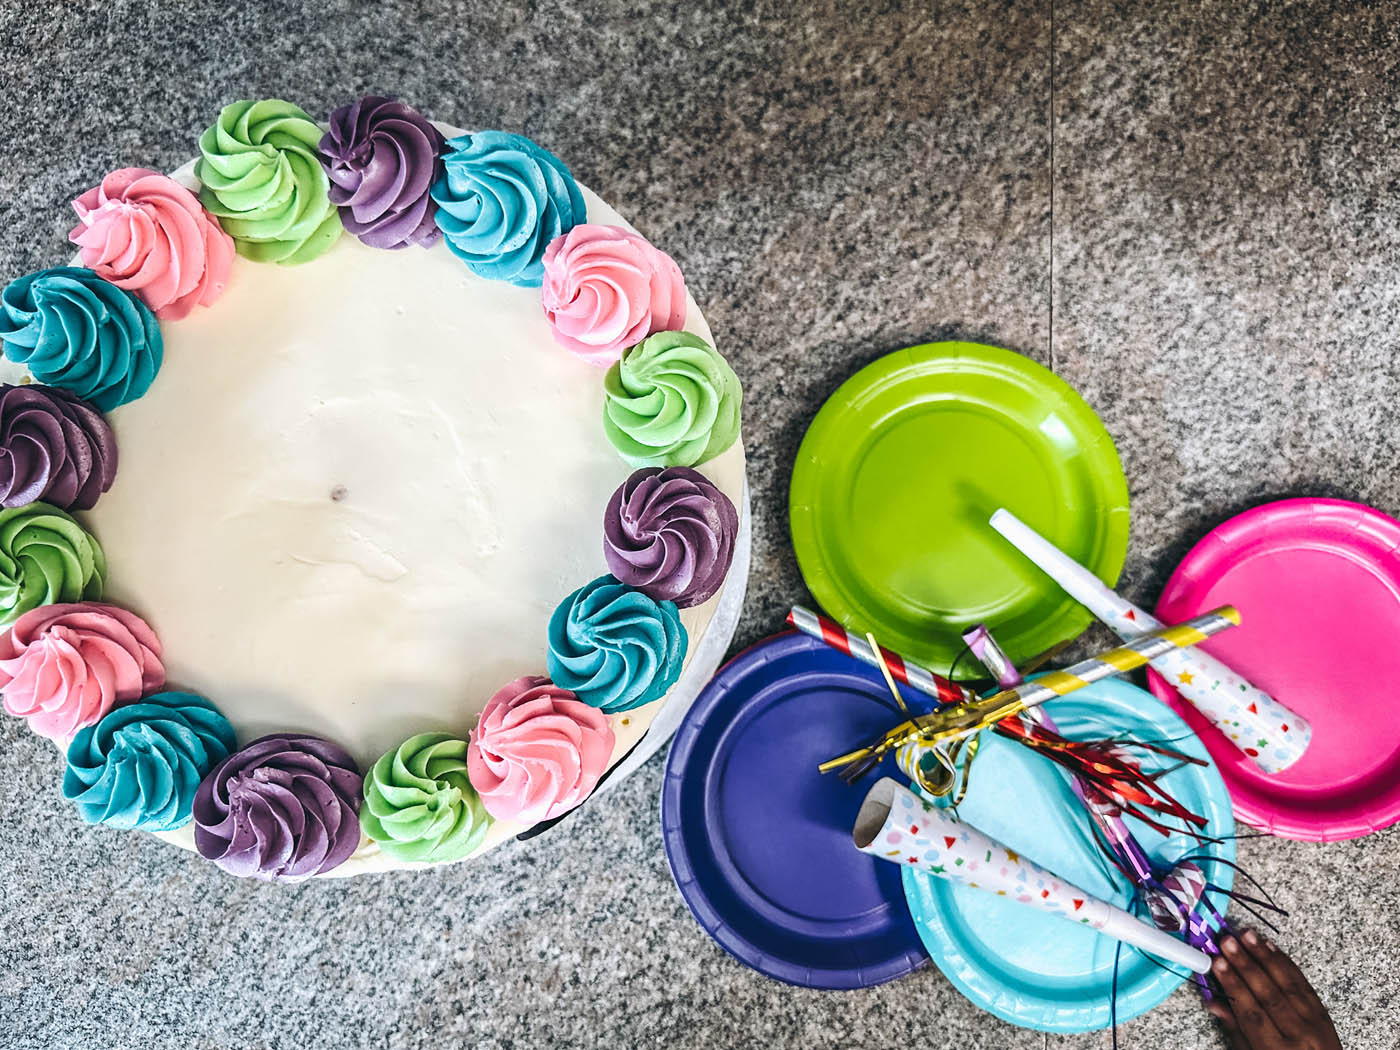 A cake and party supplies - party utensil supplies provided at Romp n' Roll toddler birthday venues in Wethersfield, CT.